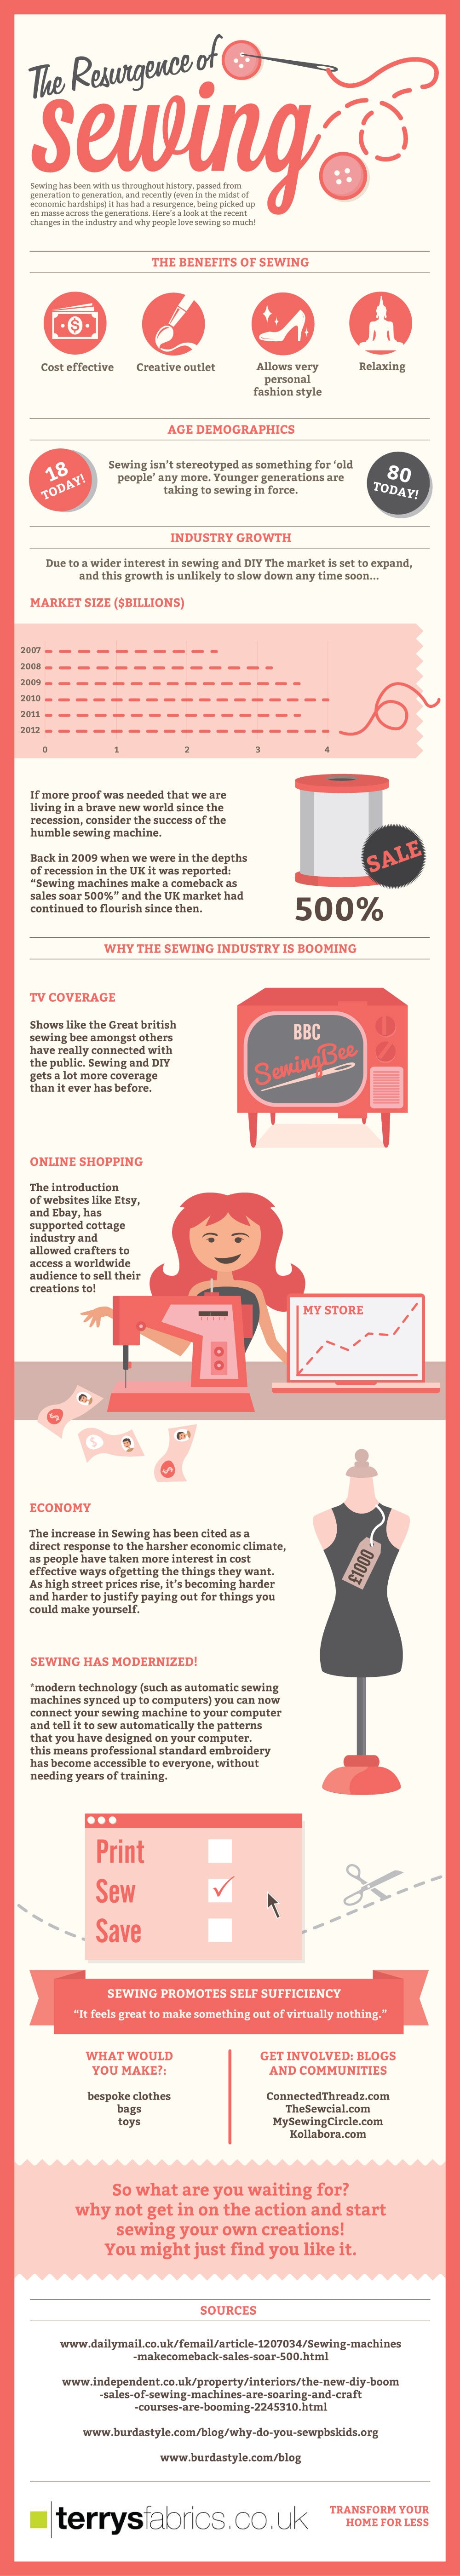 The Resurgence Of Sewing Infographic